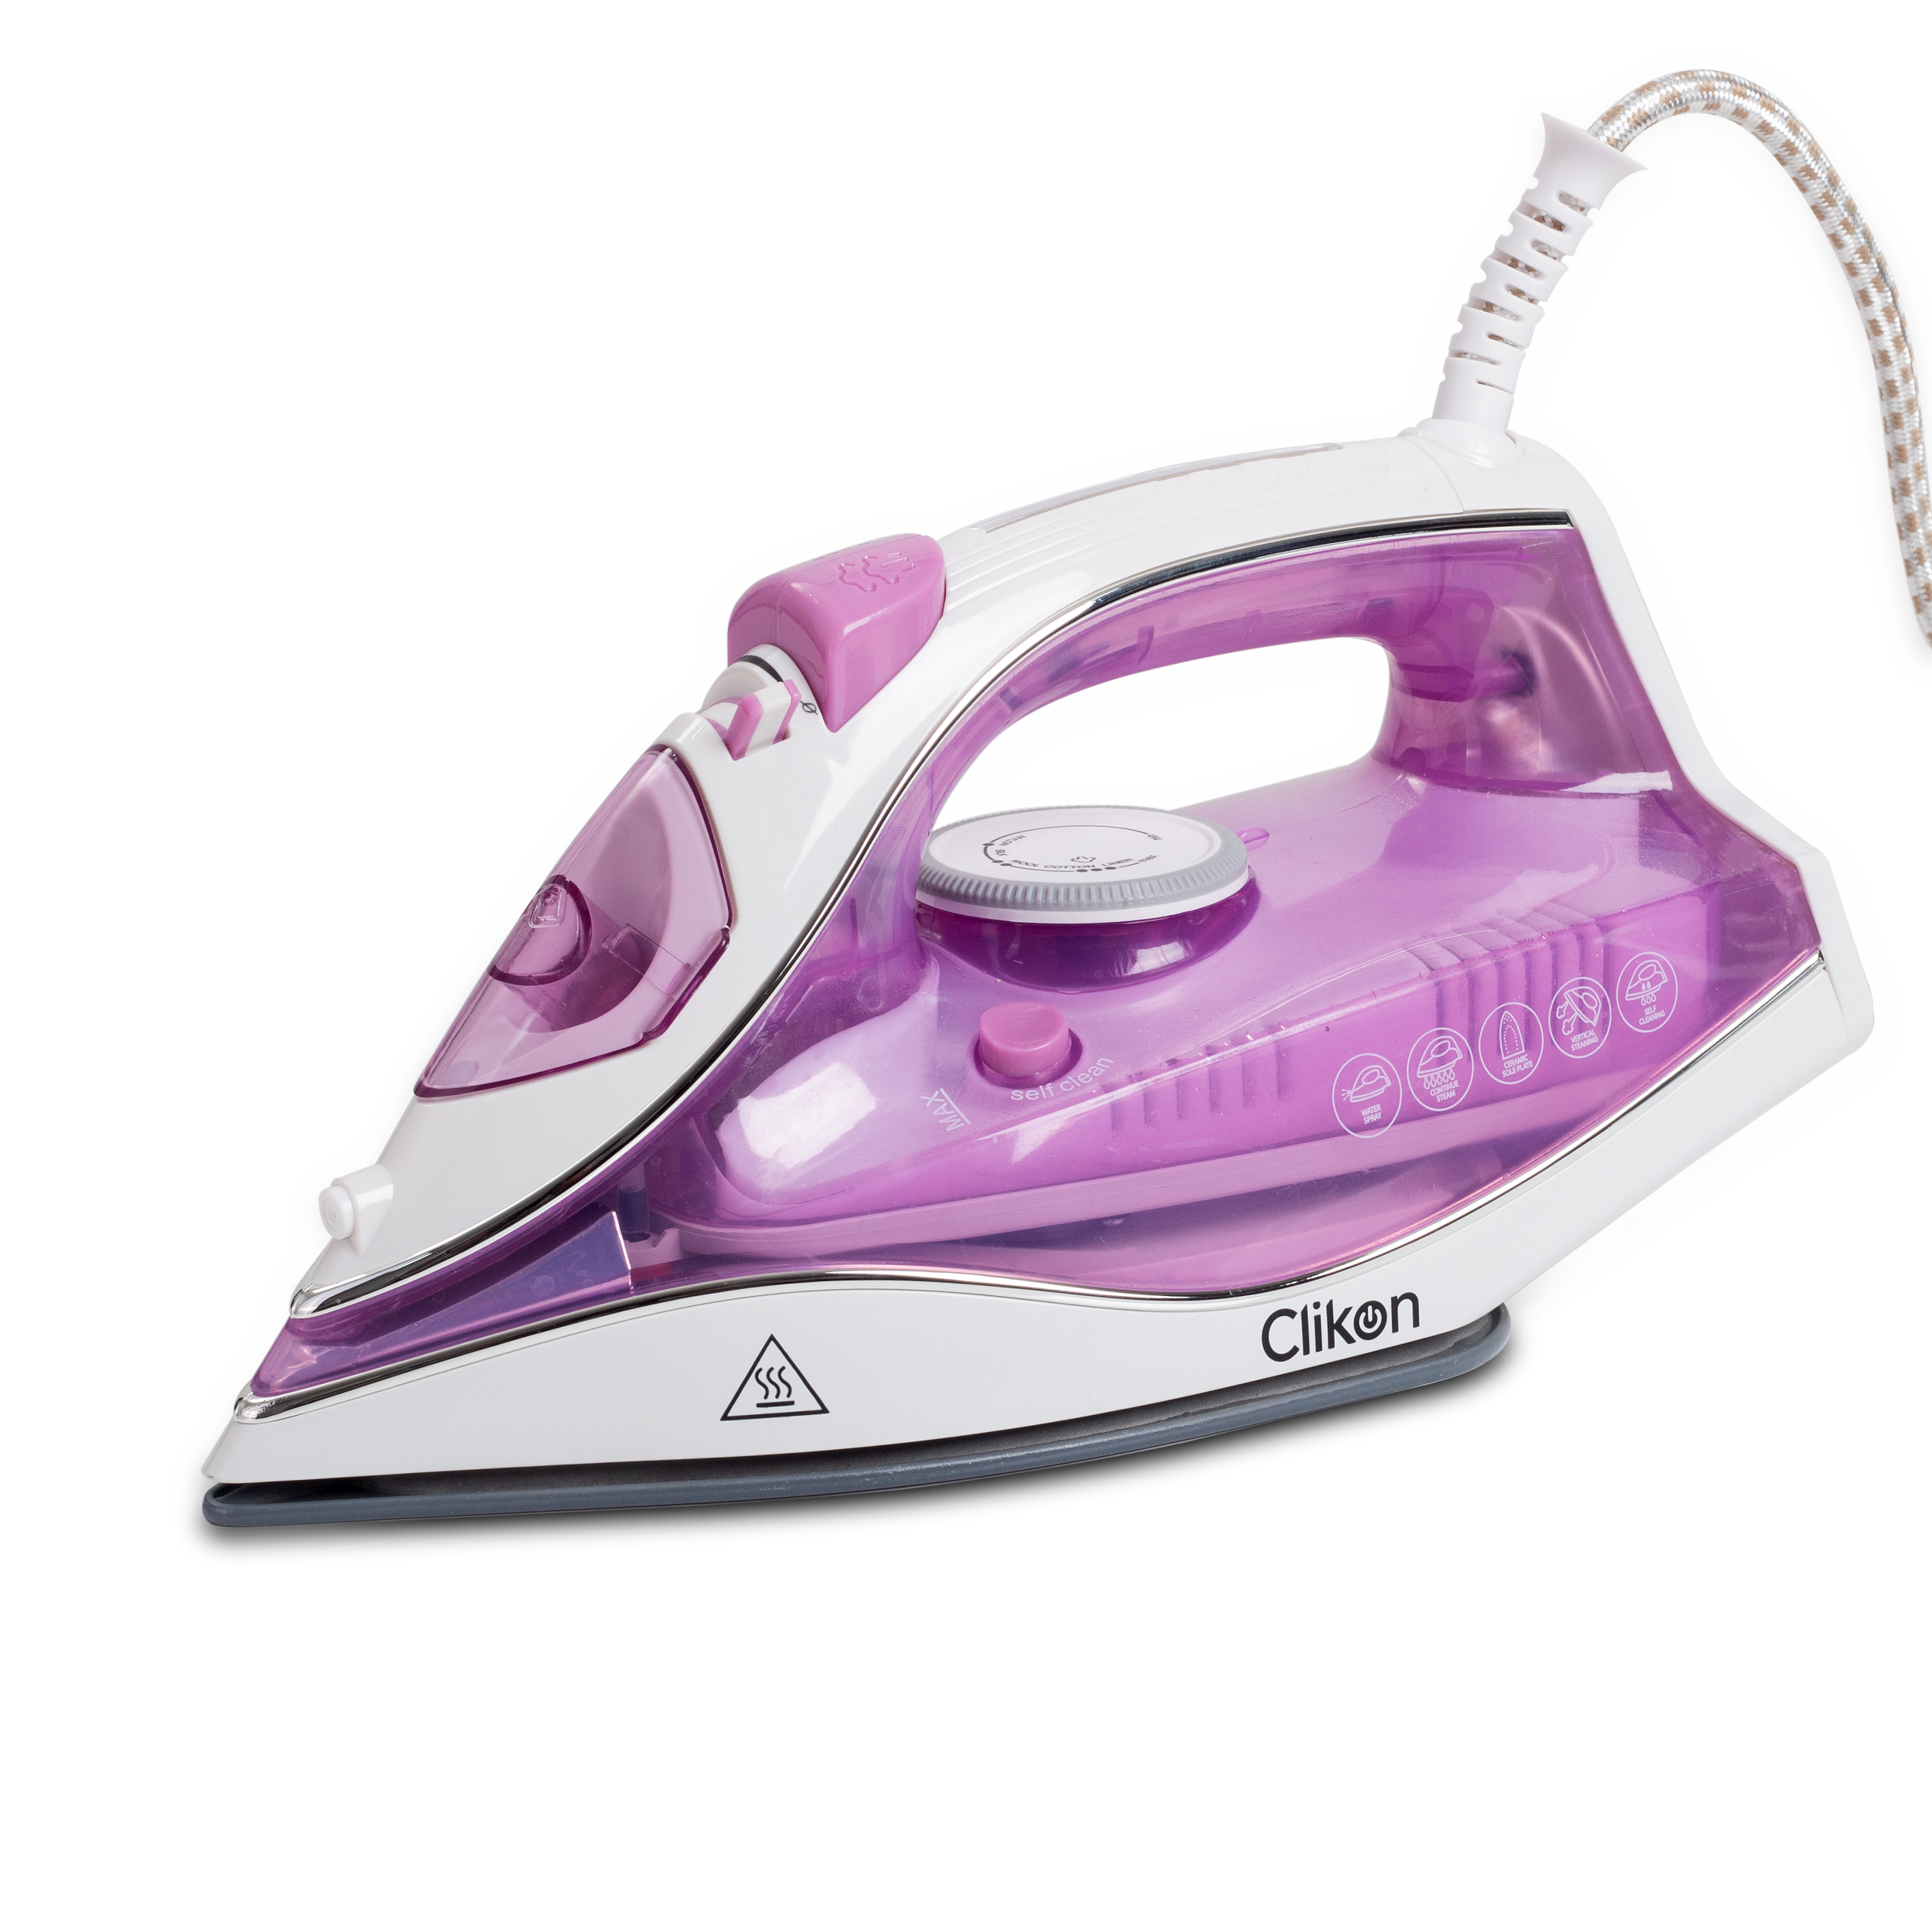 Clikon Steam Iron Box With Ceramic Coated Non-Stick Soleplate & Self Clean Function -Ck4131